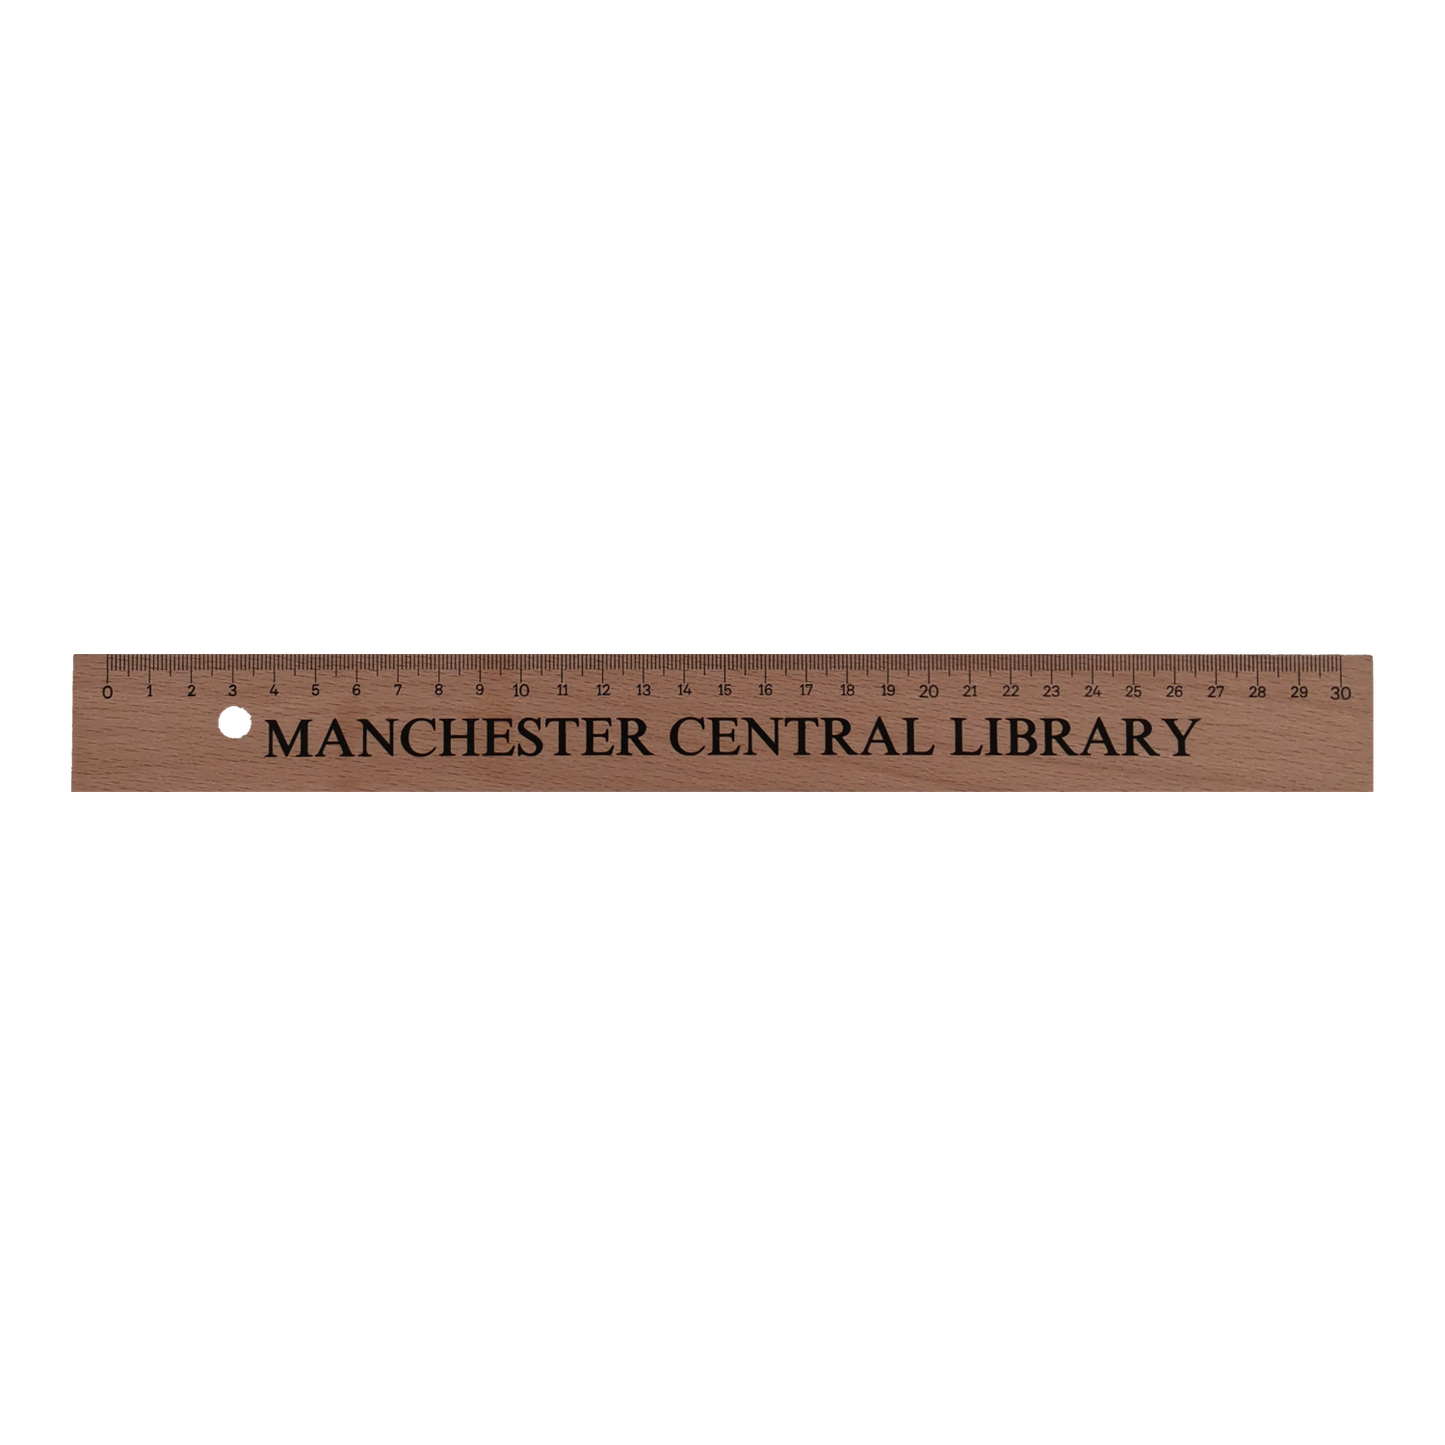 30cm wooden ruler with Manchester Central Library printed on in black text.